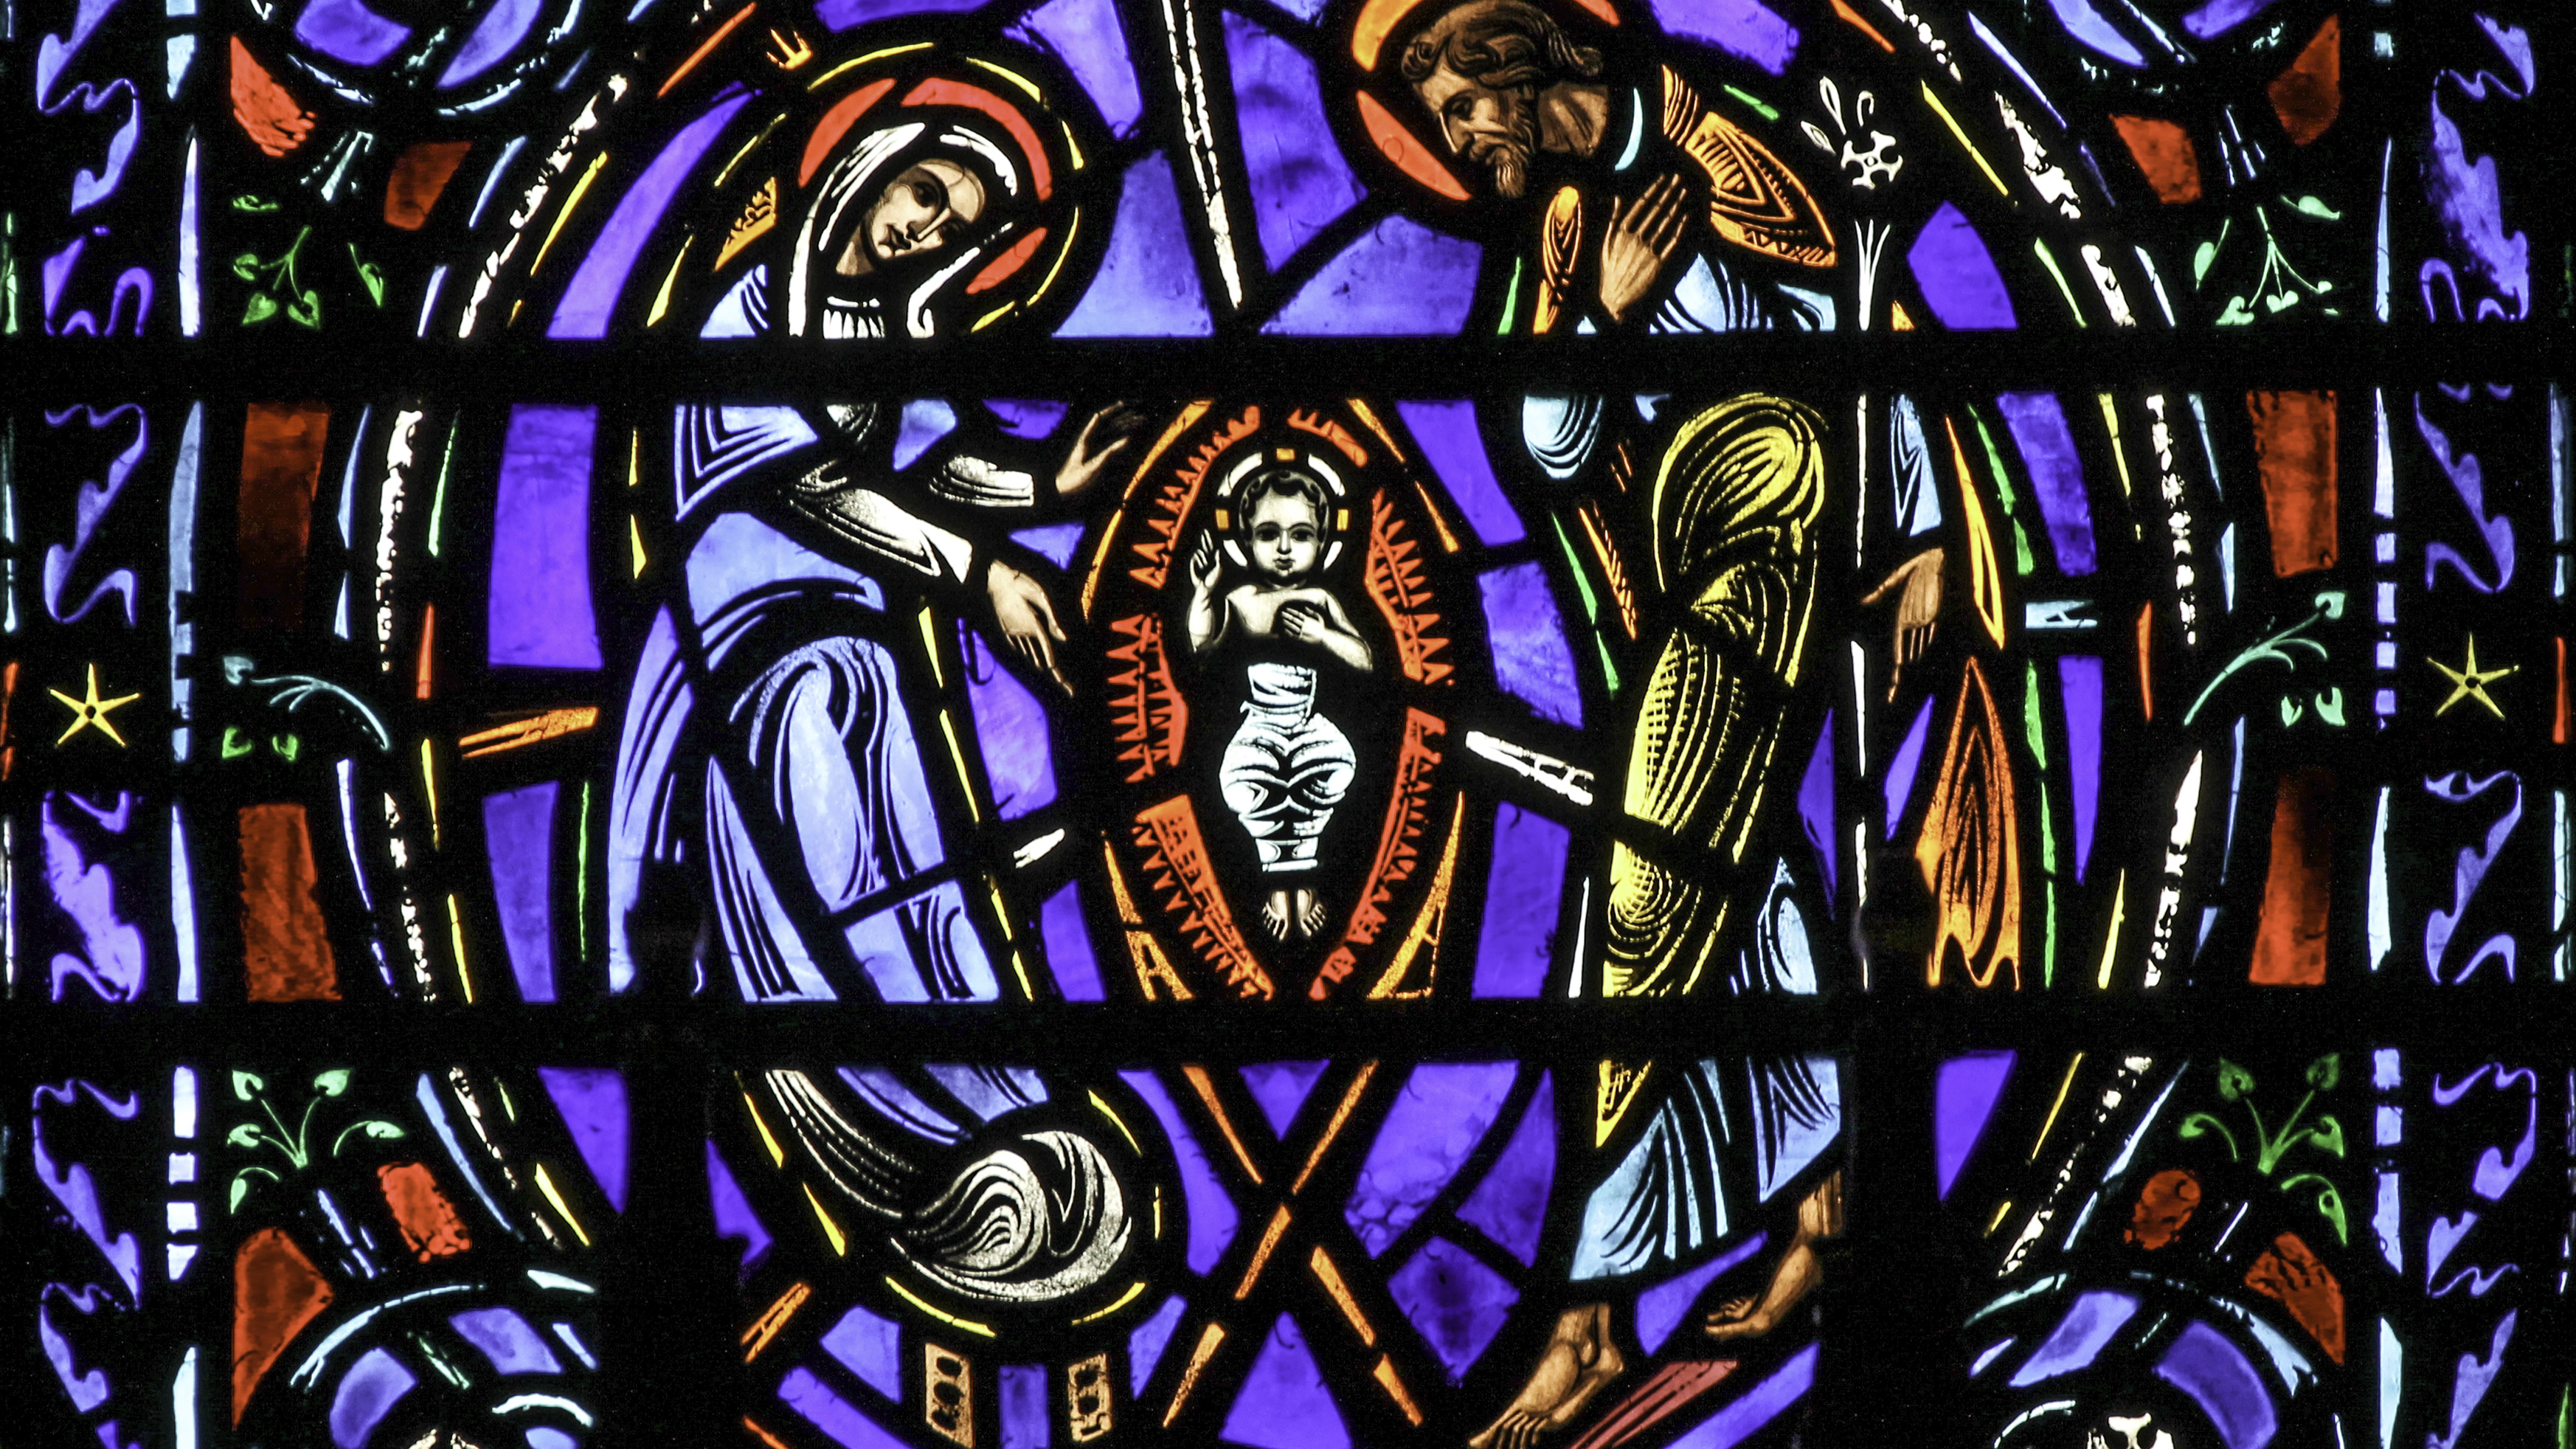 Stained glass detail from the Dominican church of St Vincent Ferrer in New York, showing Jesus in a manger surrounded by Mary and Joseph.